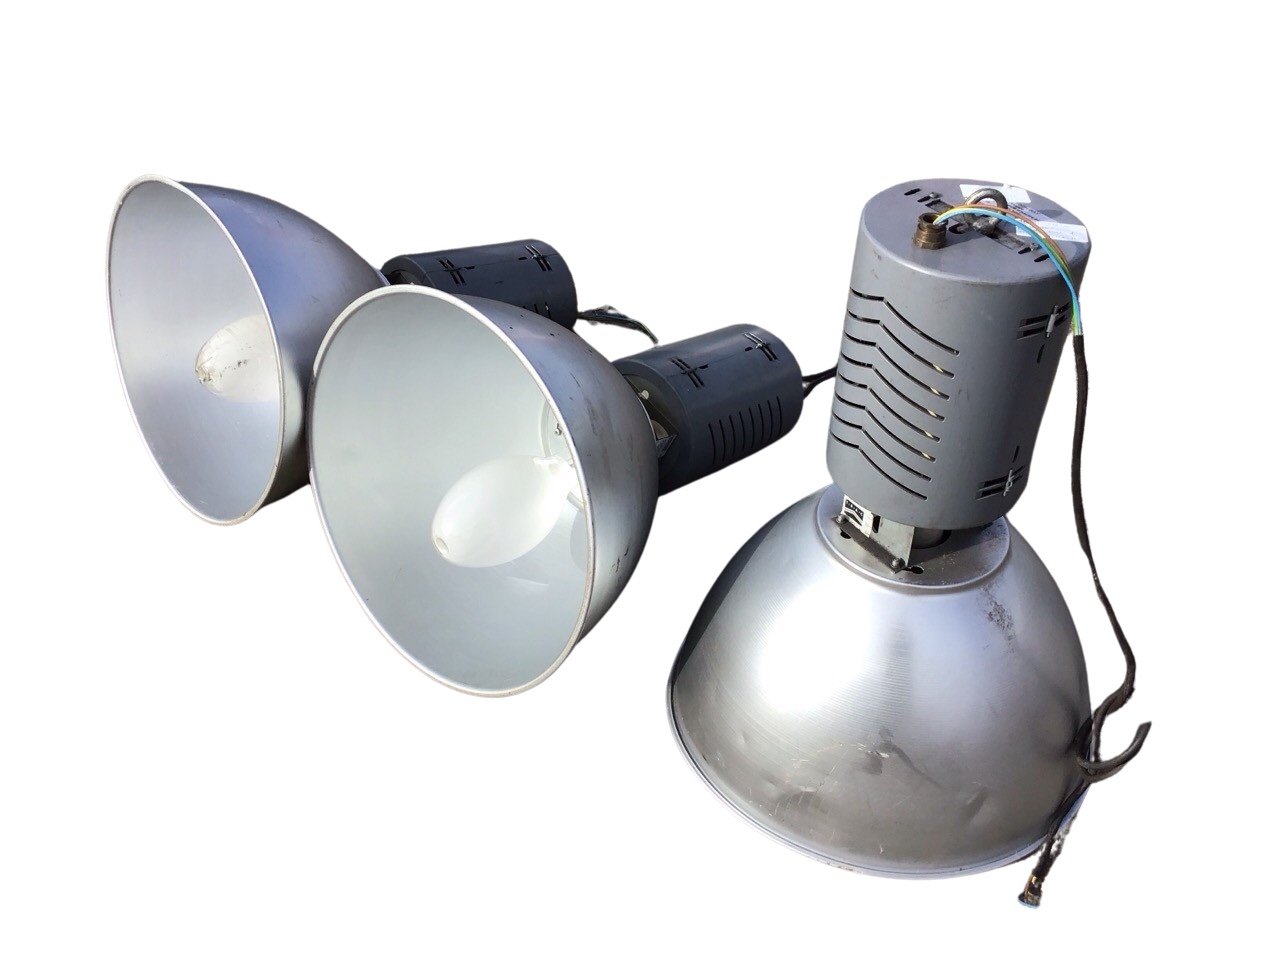 A set of three TRAC industrial lights with adjustable beams, the pierced cylindrical bodies above